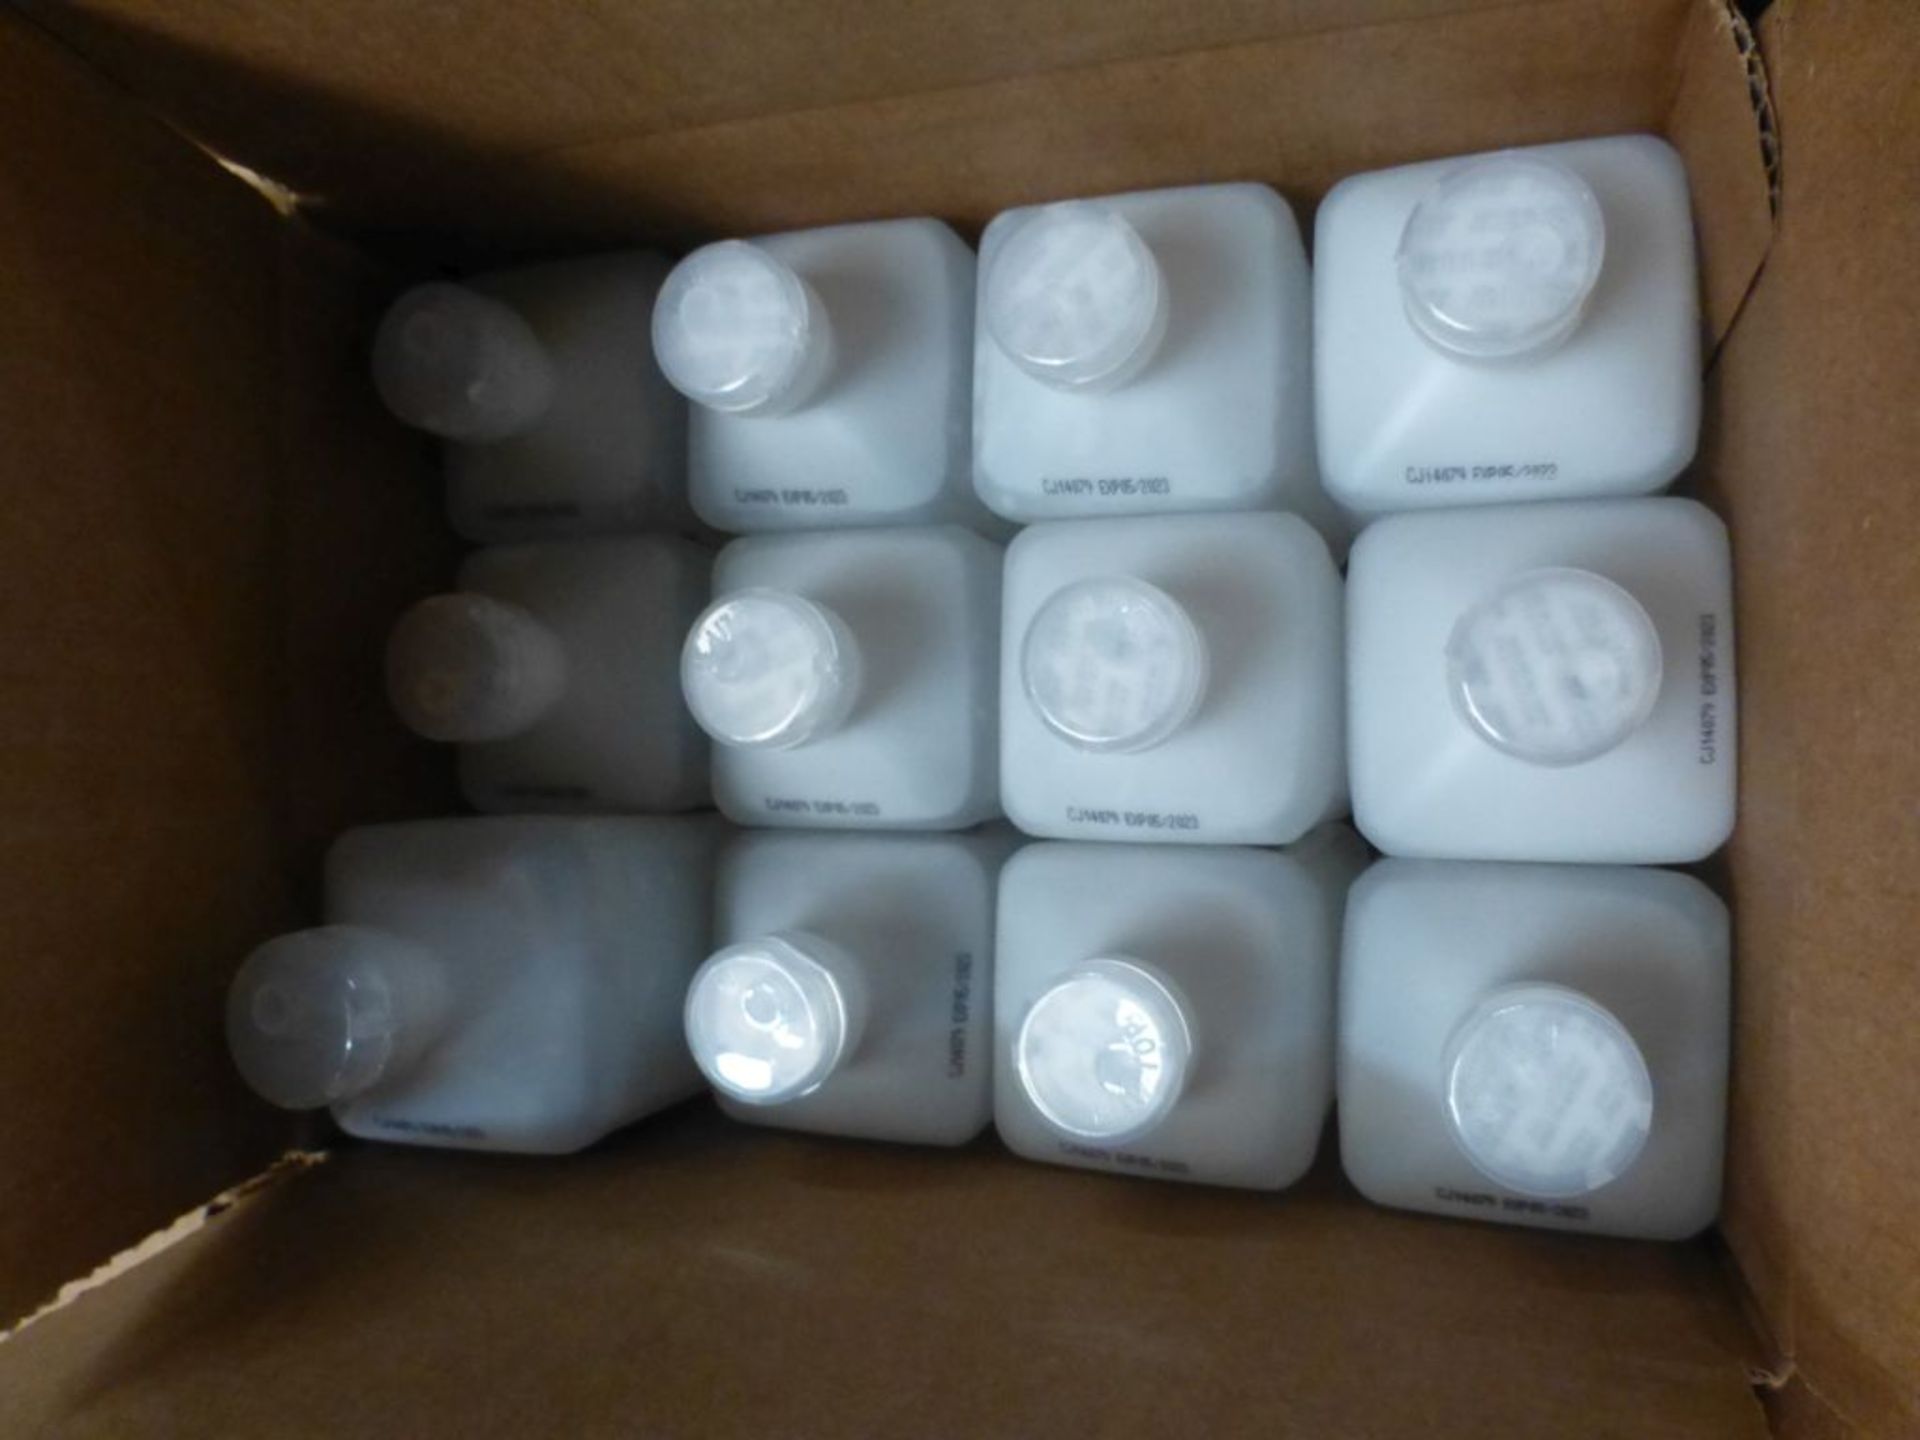 Lot of (1740) 16 oz. Bottles of Purrell Advanced Emergency Response Gel Hand Sanitizer - Part No. - Image 6 of 7